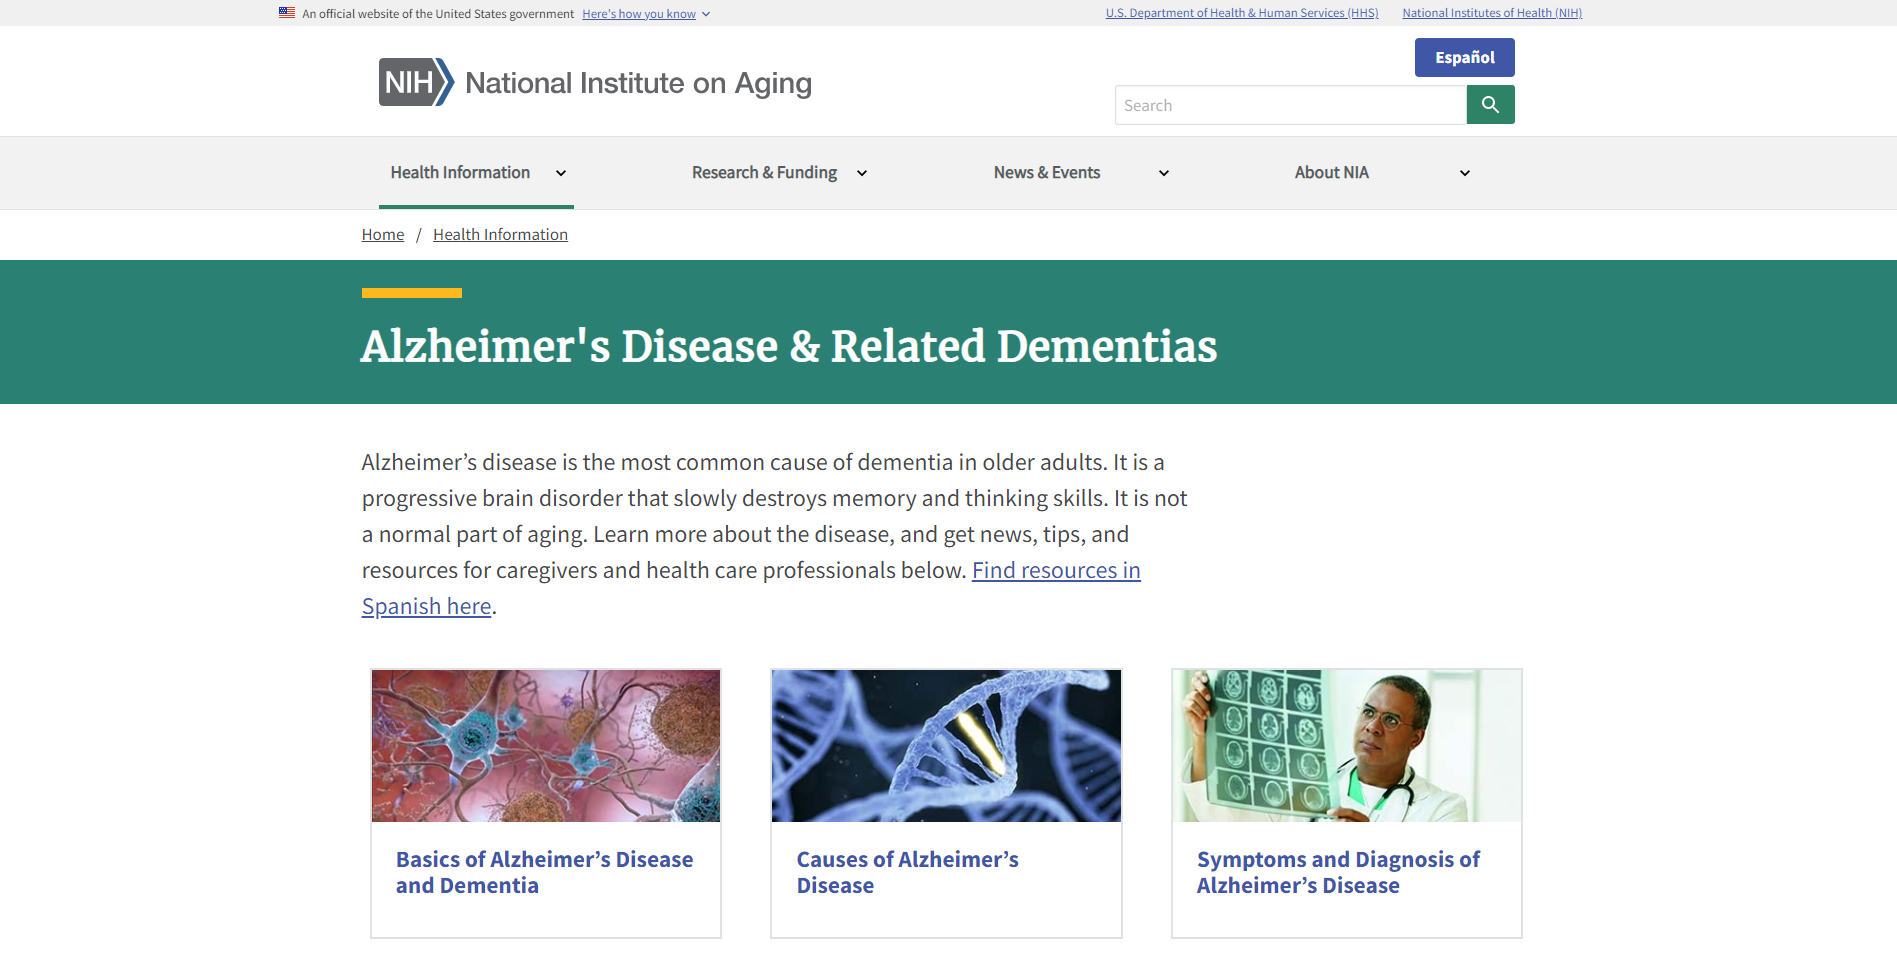 Alzheimer's Disease and Related Dementias